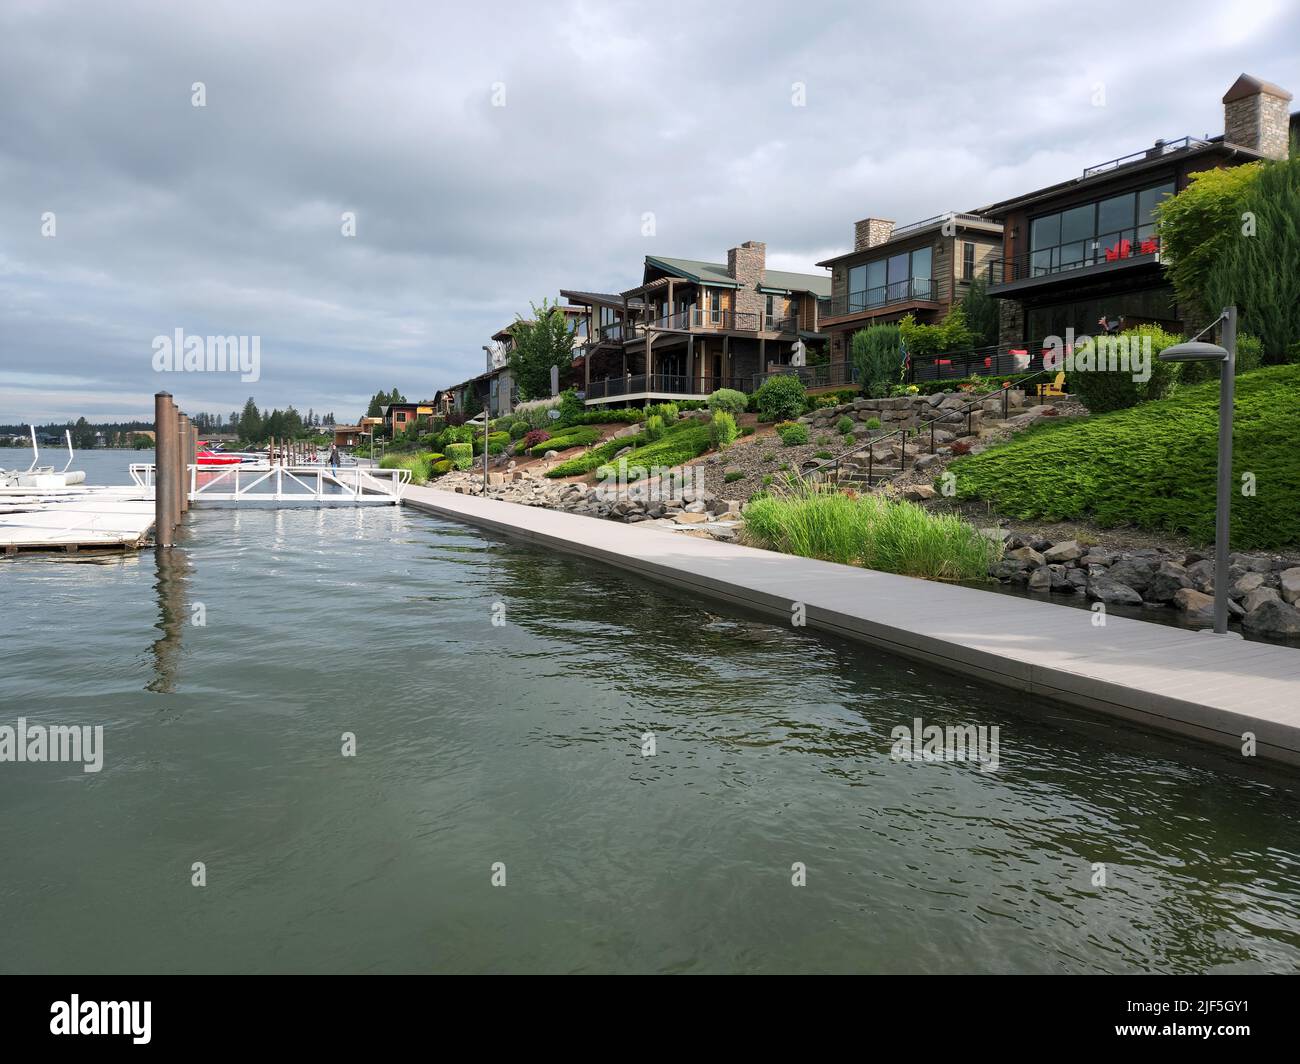 Coeur d'Alene, Idaho - June 18, 20922 - Spokane River and surrounding residential areas in city center. Stock Photo